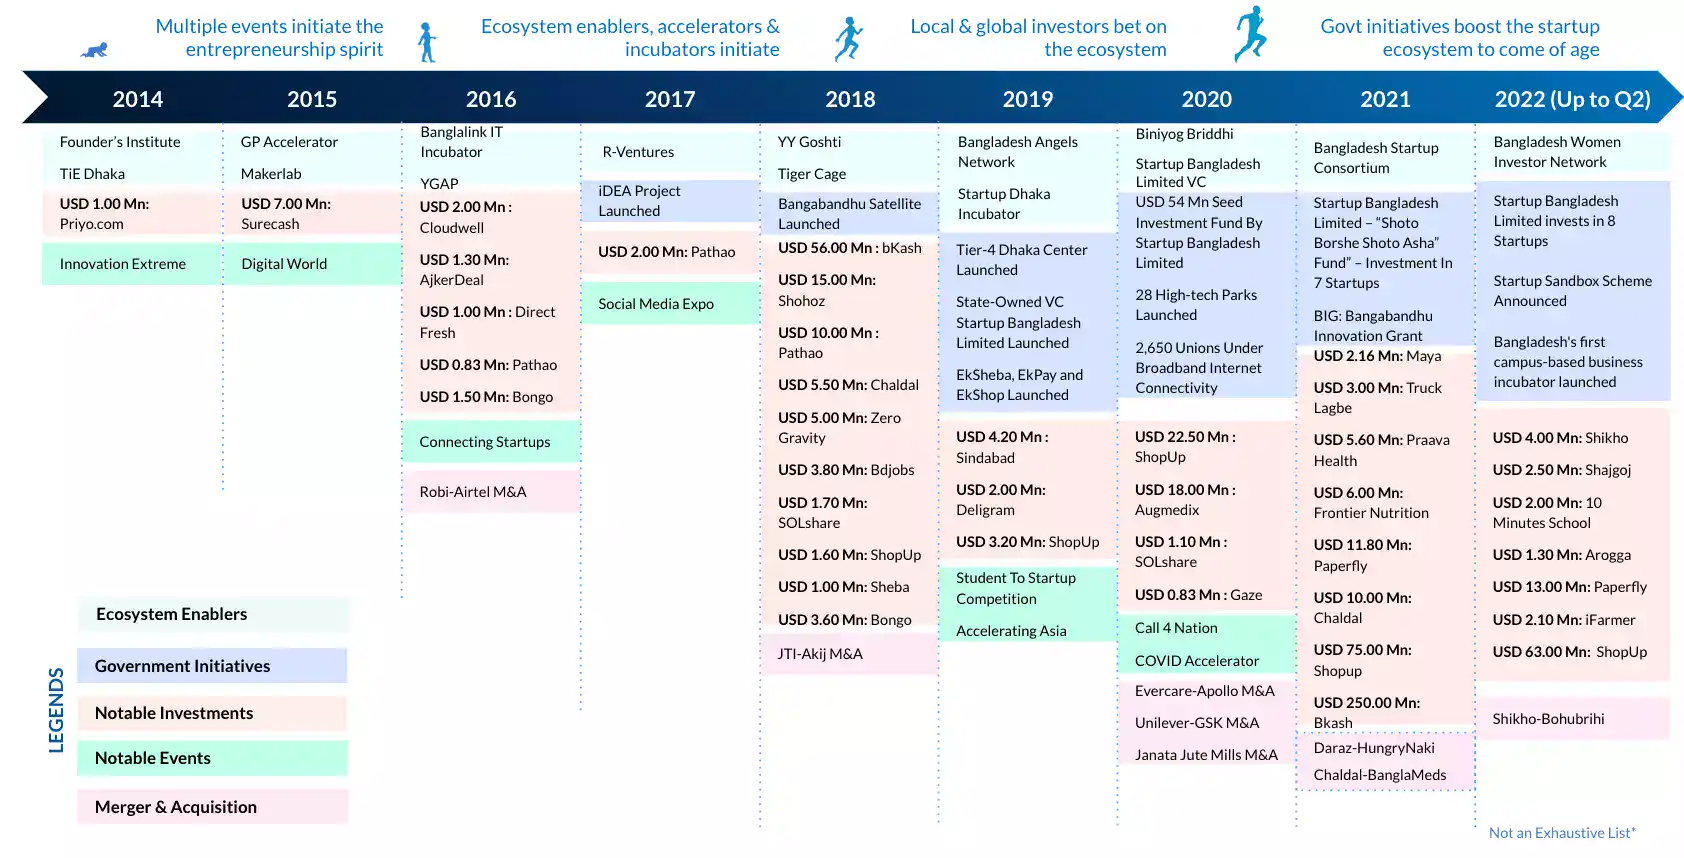 Timeline of Key Activities in the Startup Ecosystem in Bangladesh